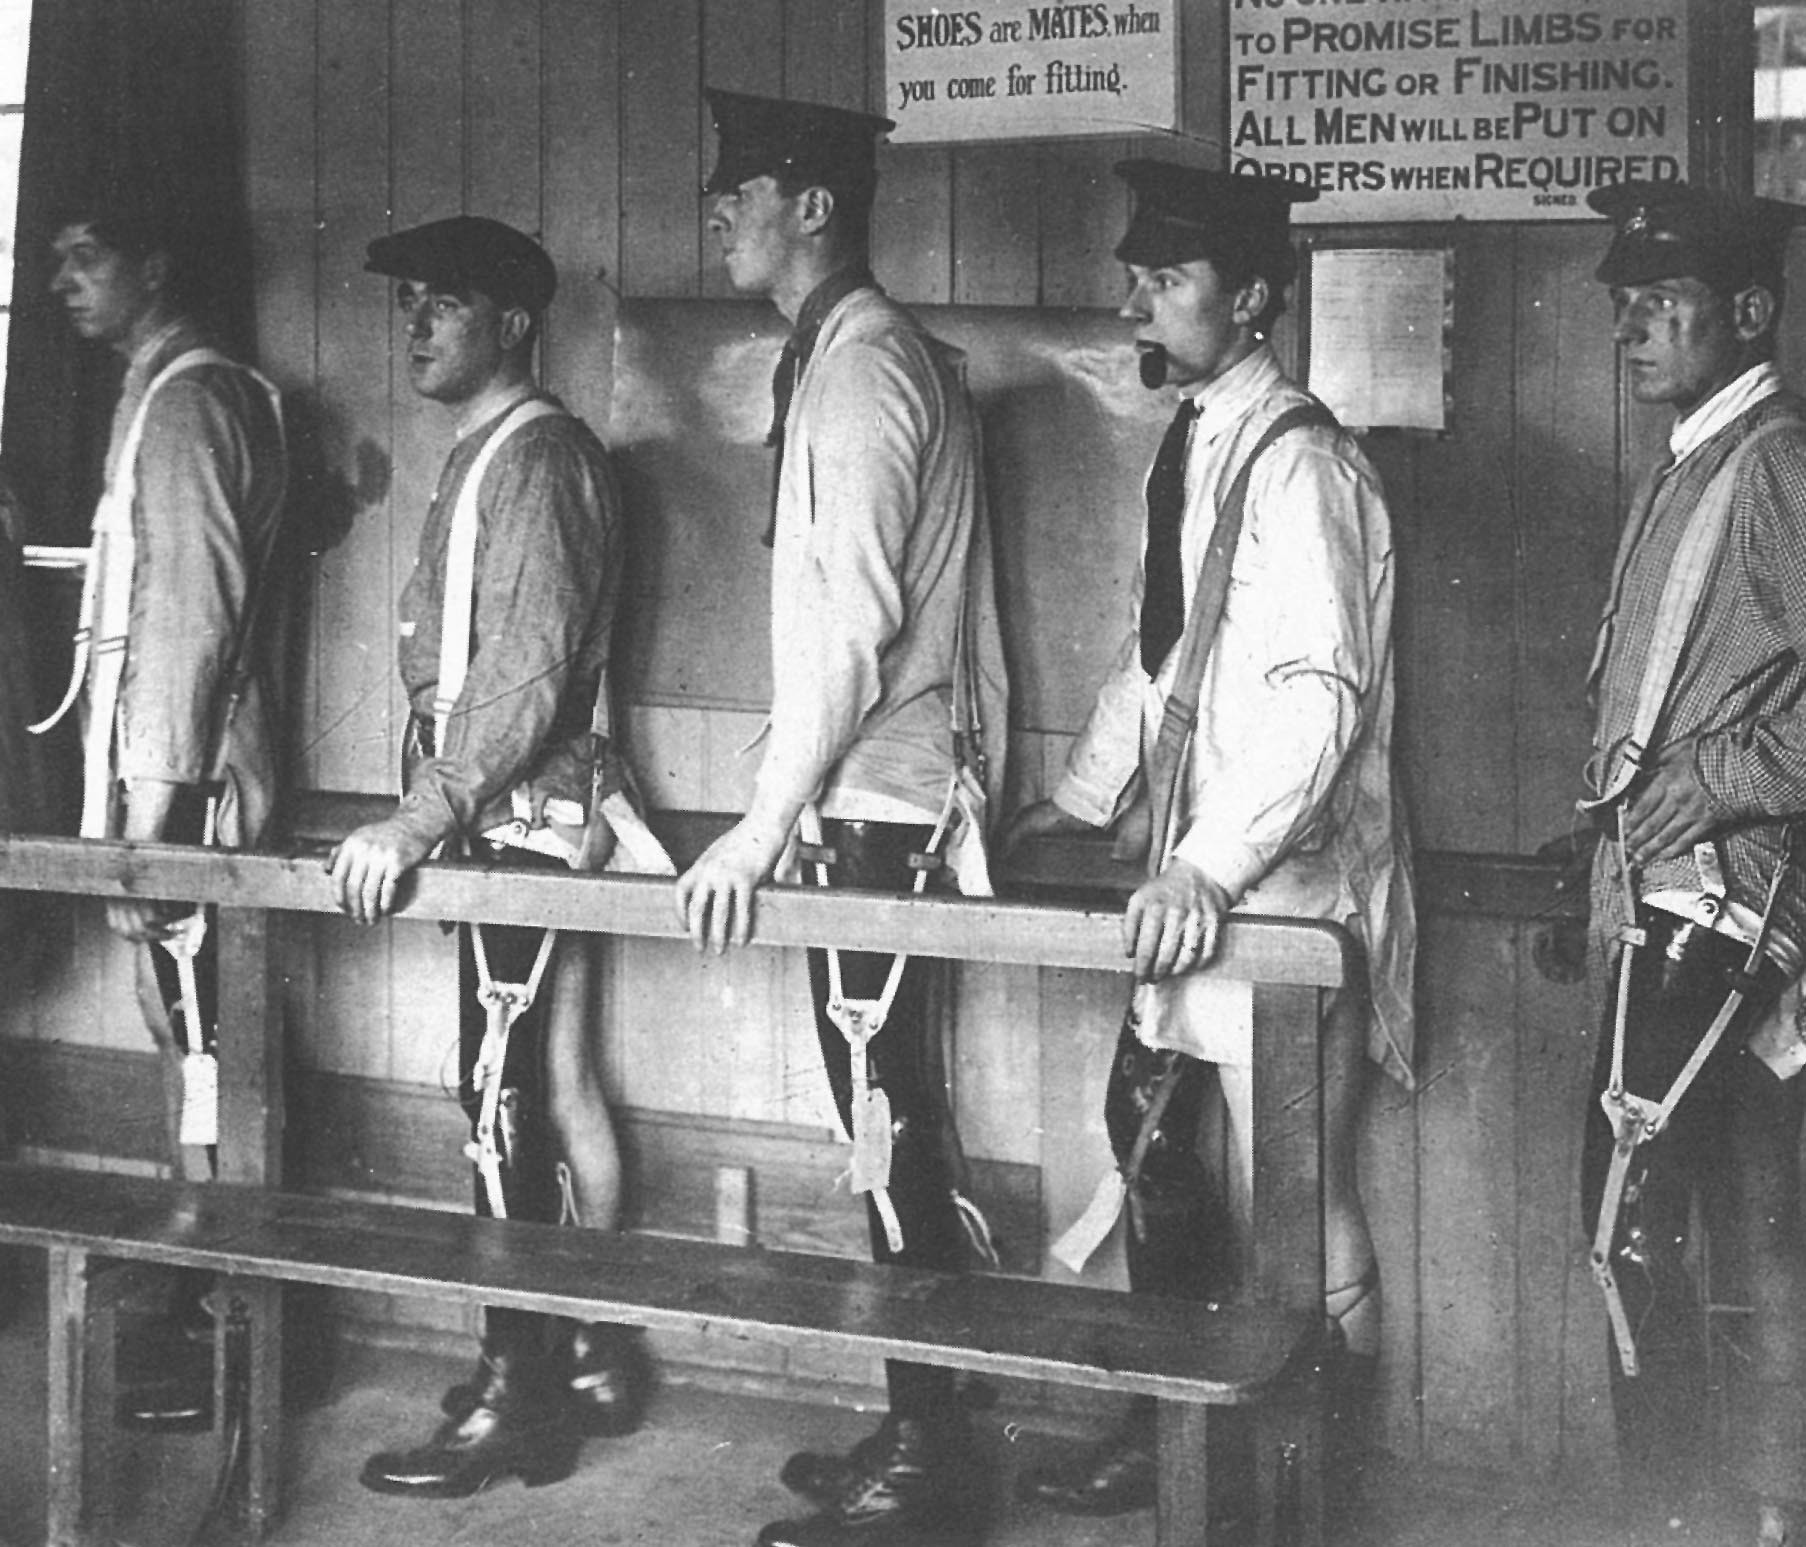 A row of men in army caps line up, each wearing a prosthetic leg.